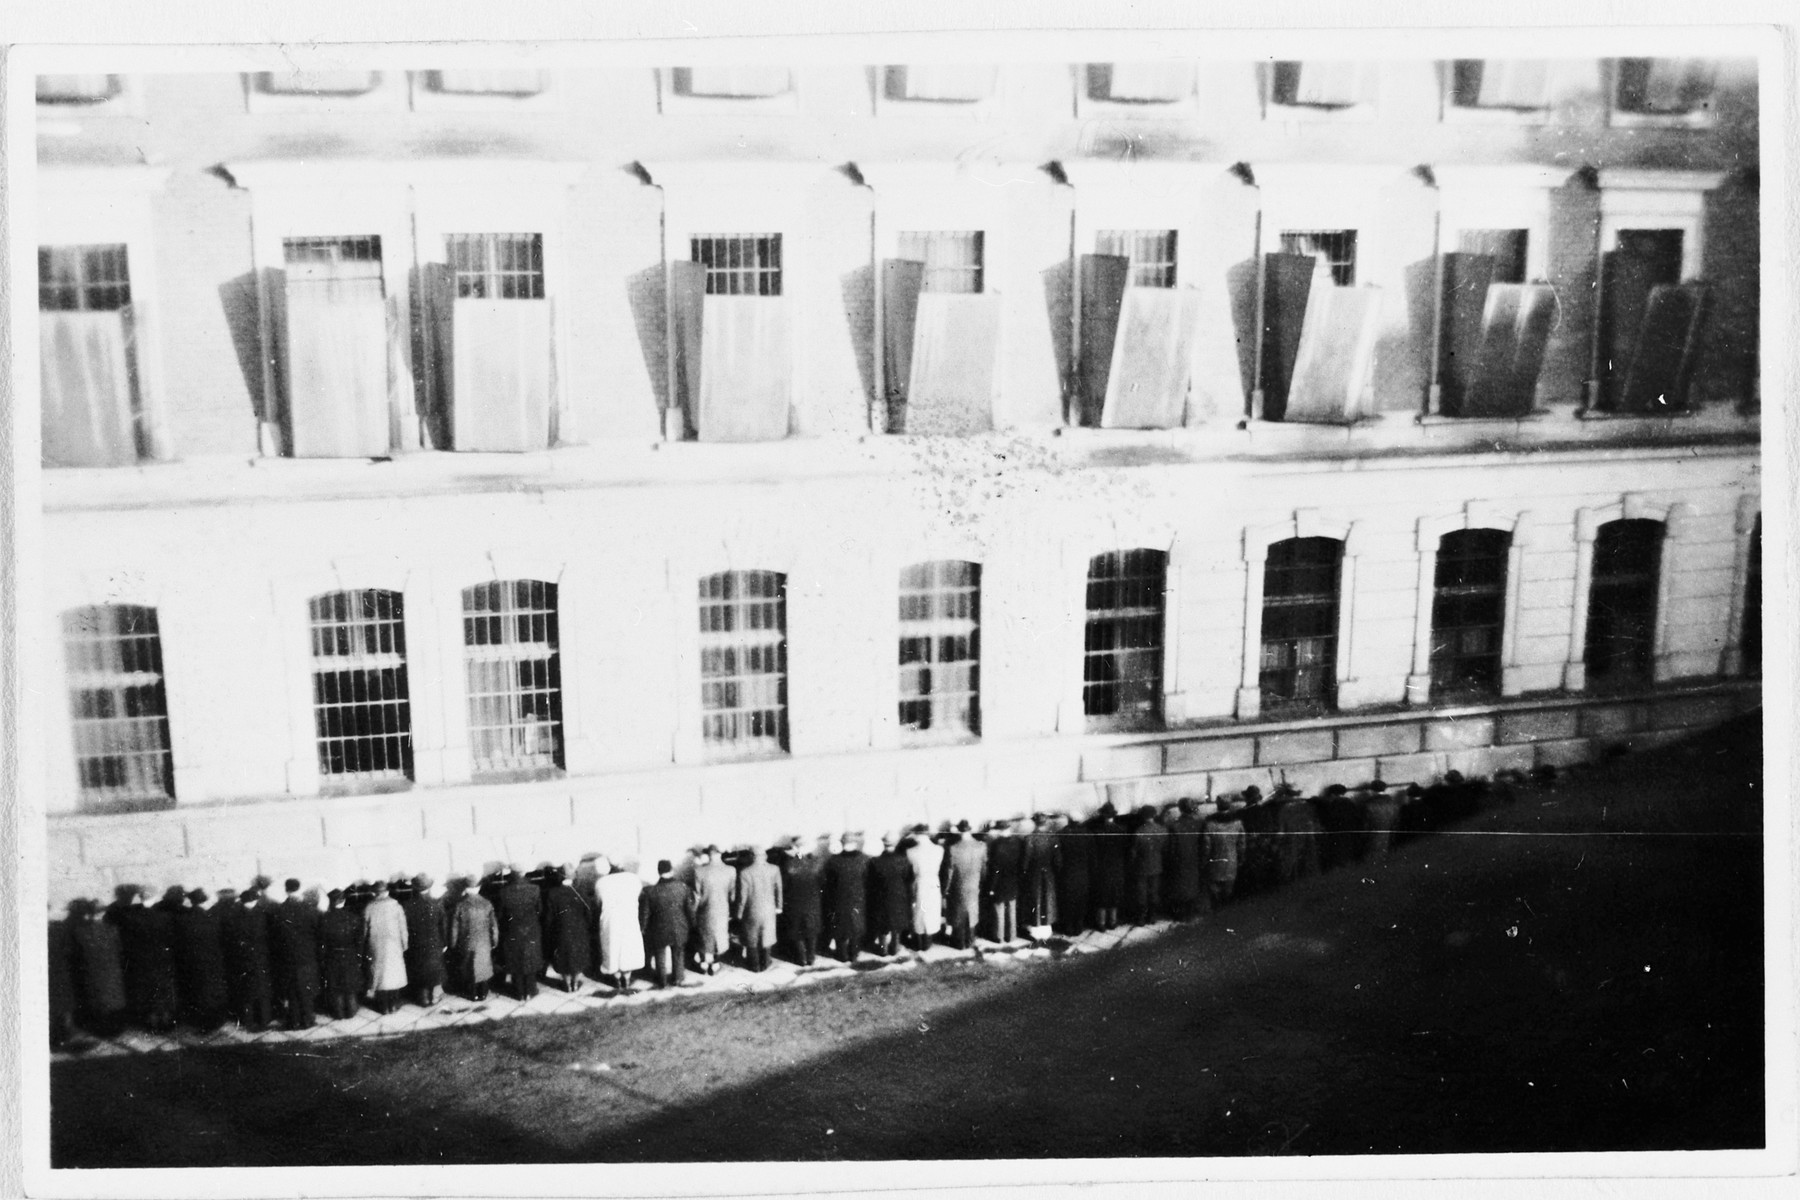 Civilians arrested by German police are held prisoner in the courtyard of the Montelupich prison in Krakow.